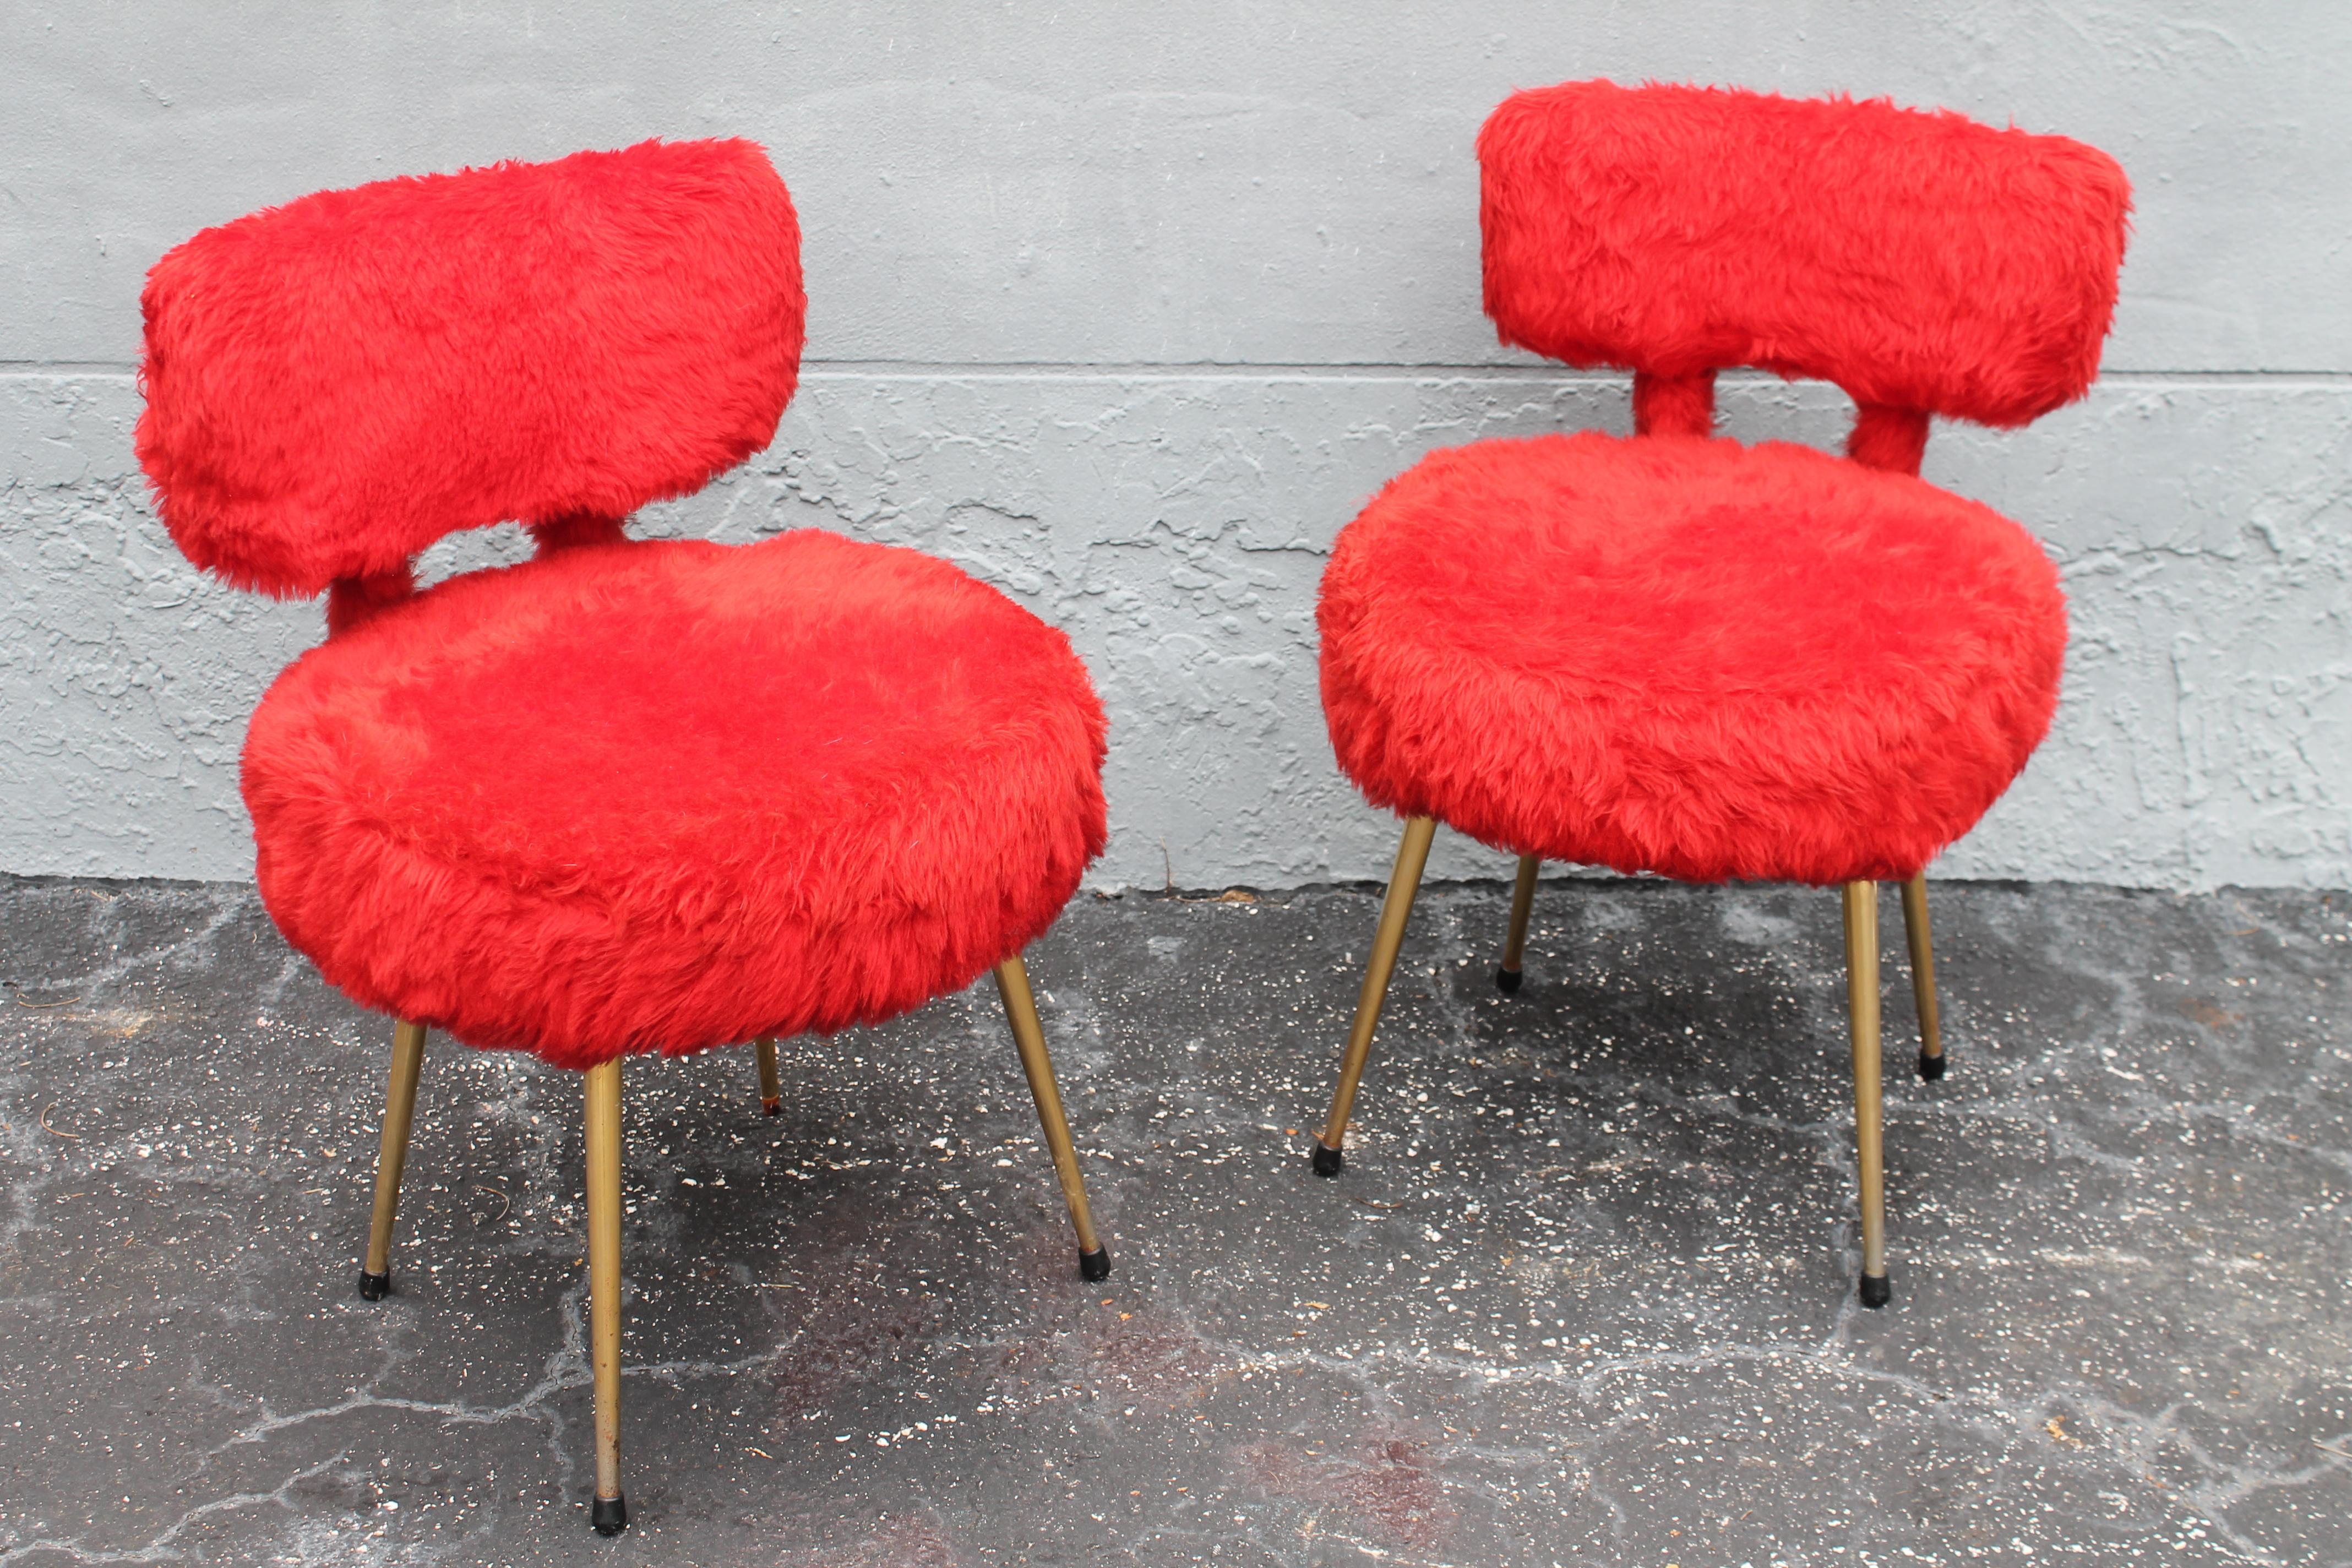 Pair of French Mid Century Modern Red Faux Fur Side Chairs. Metal legs. This pair is fun and they would fit in most styles.